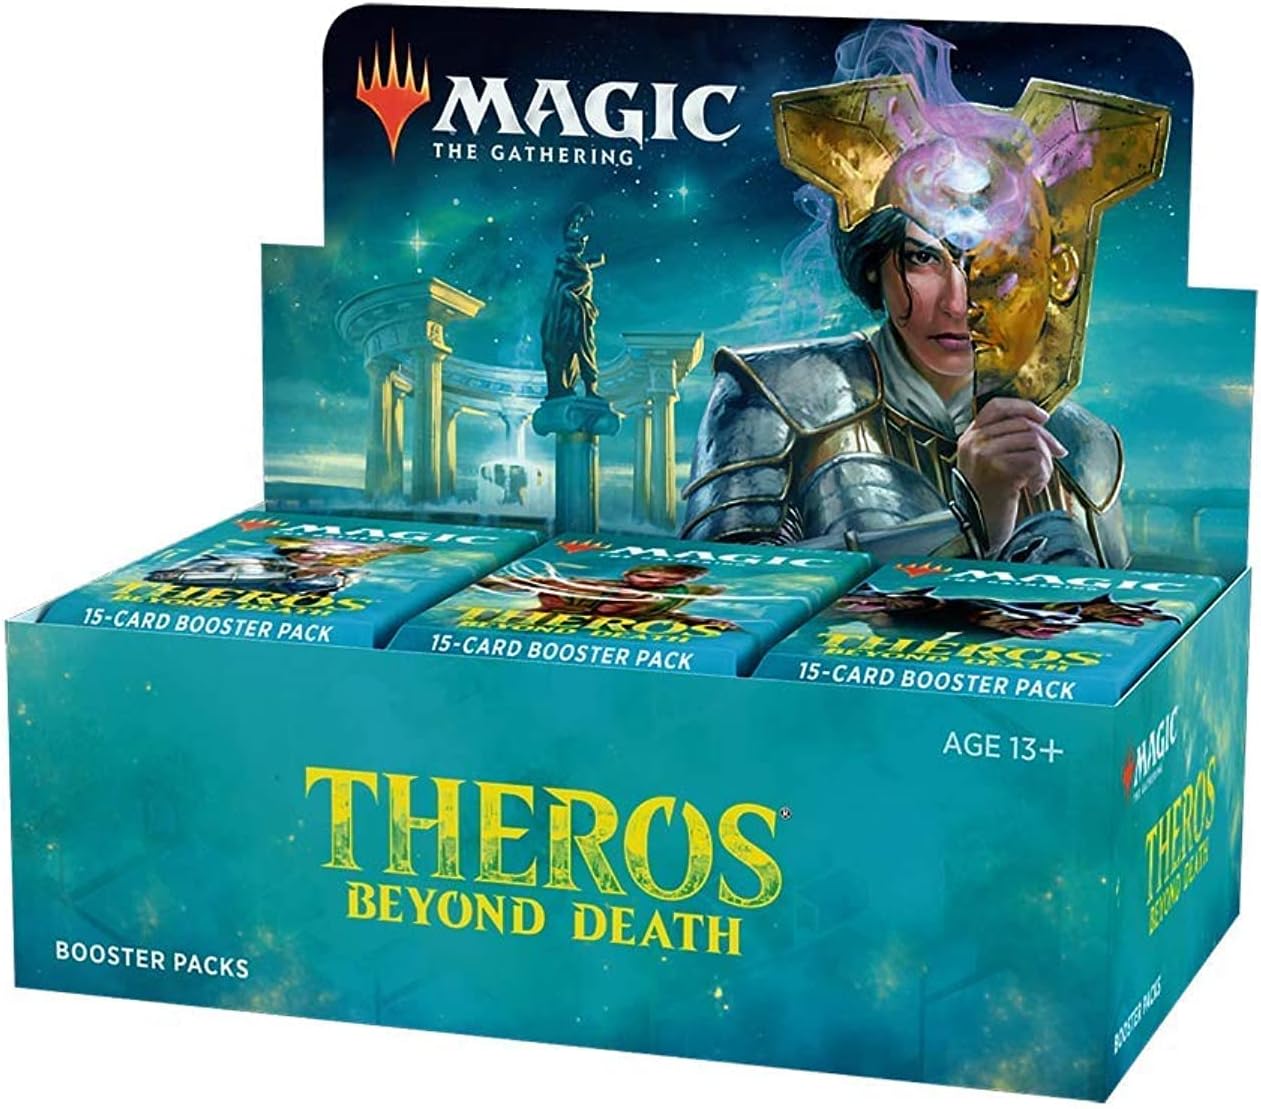 Theros Beyond Death Booster Box